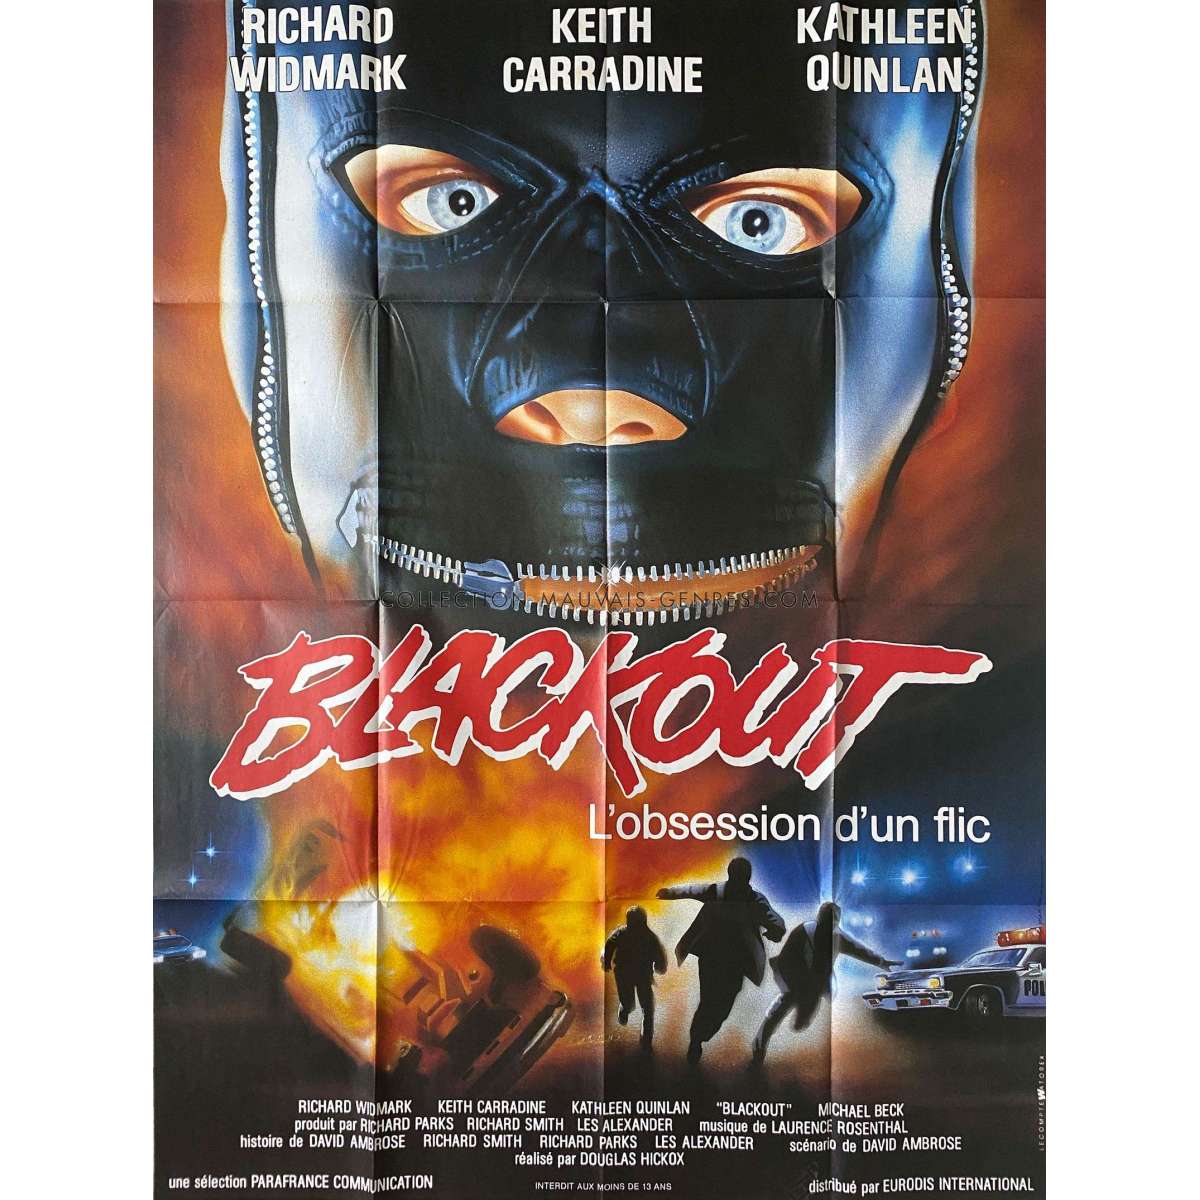 BLACKOUT French Movie Poster - 47x63 in. - 1985